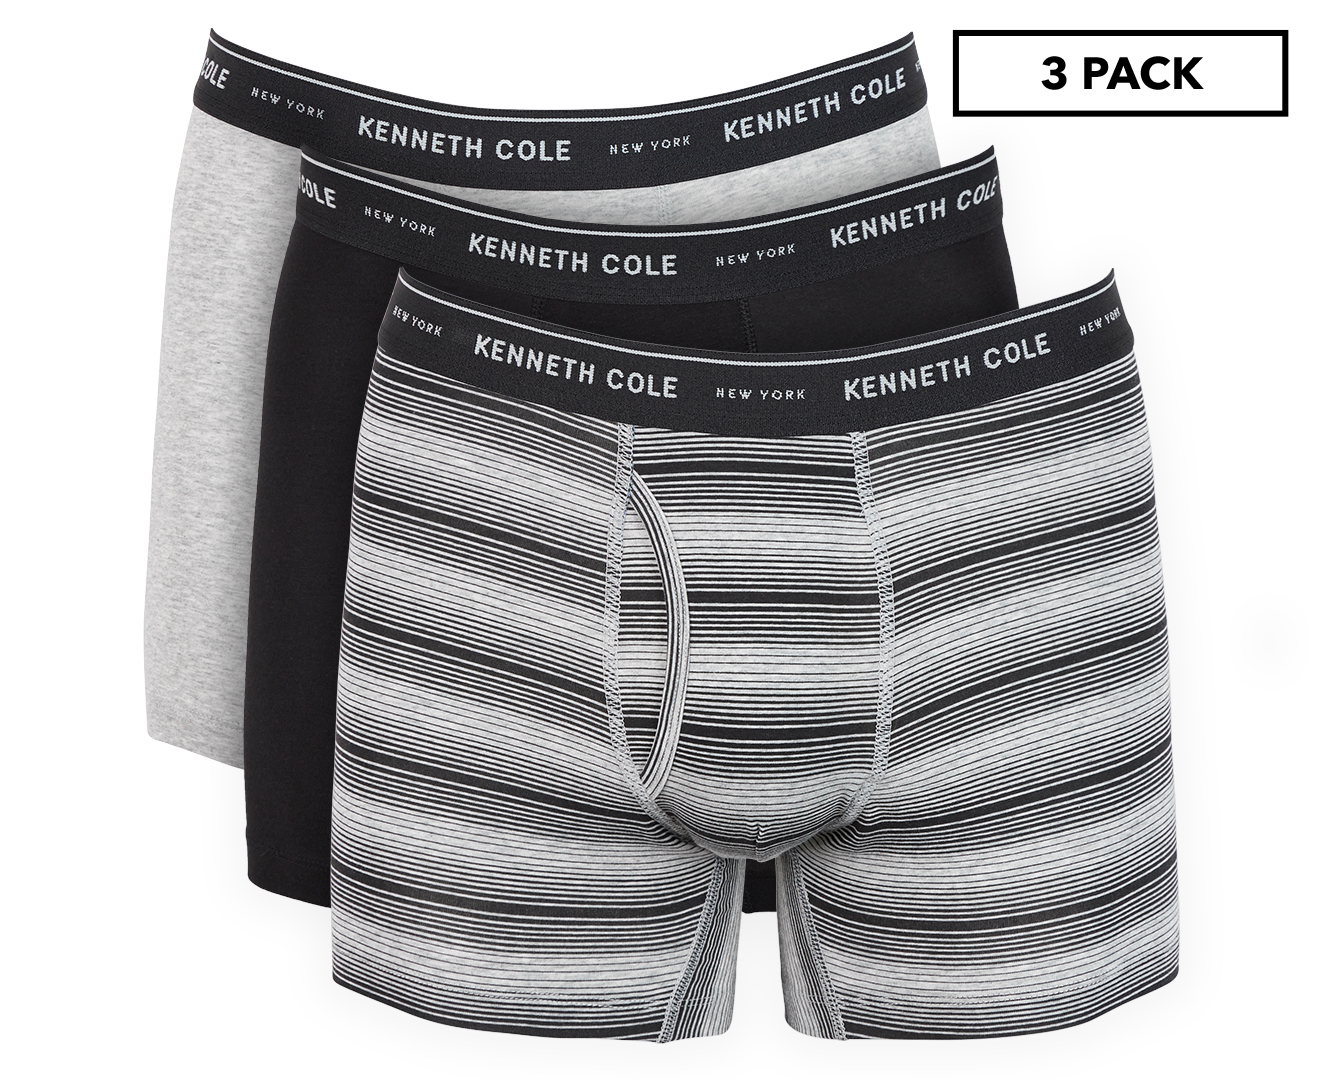 Kenneth Cole Mens 3 Pack Trunks Boxer Briefs